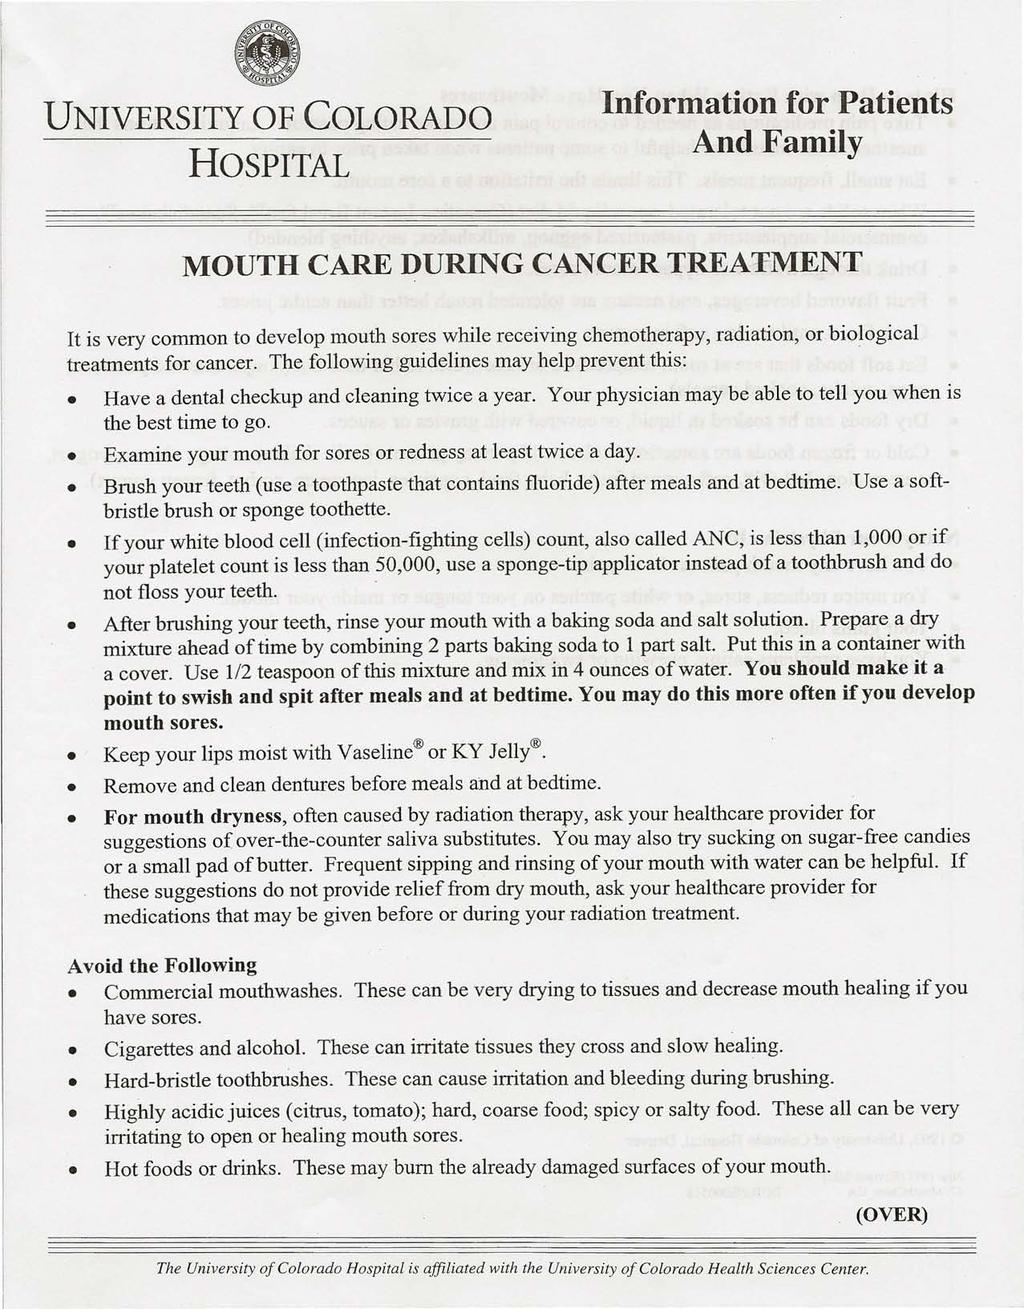 UNIVERSITY OF COLORADO HOSPITAL Information for Patients And Family MOUTH CARE DURING CANCER TREATMENT It is very common to develop mouth sores while receiving chemotherapy, radiation, or biological